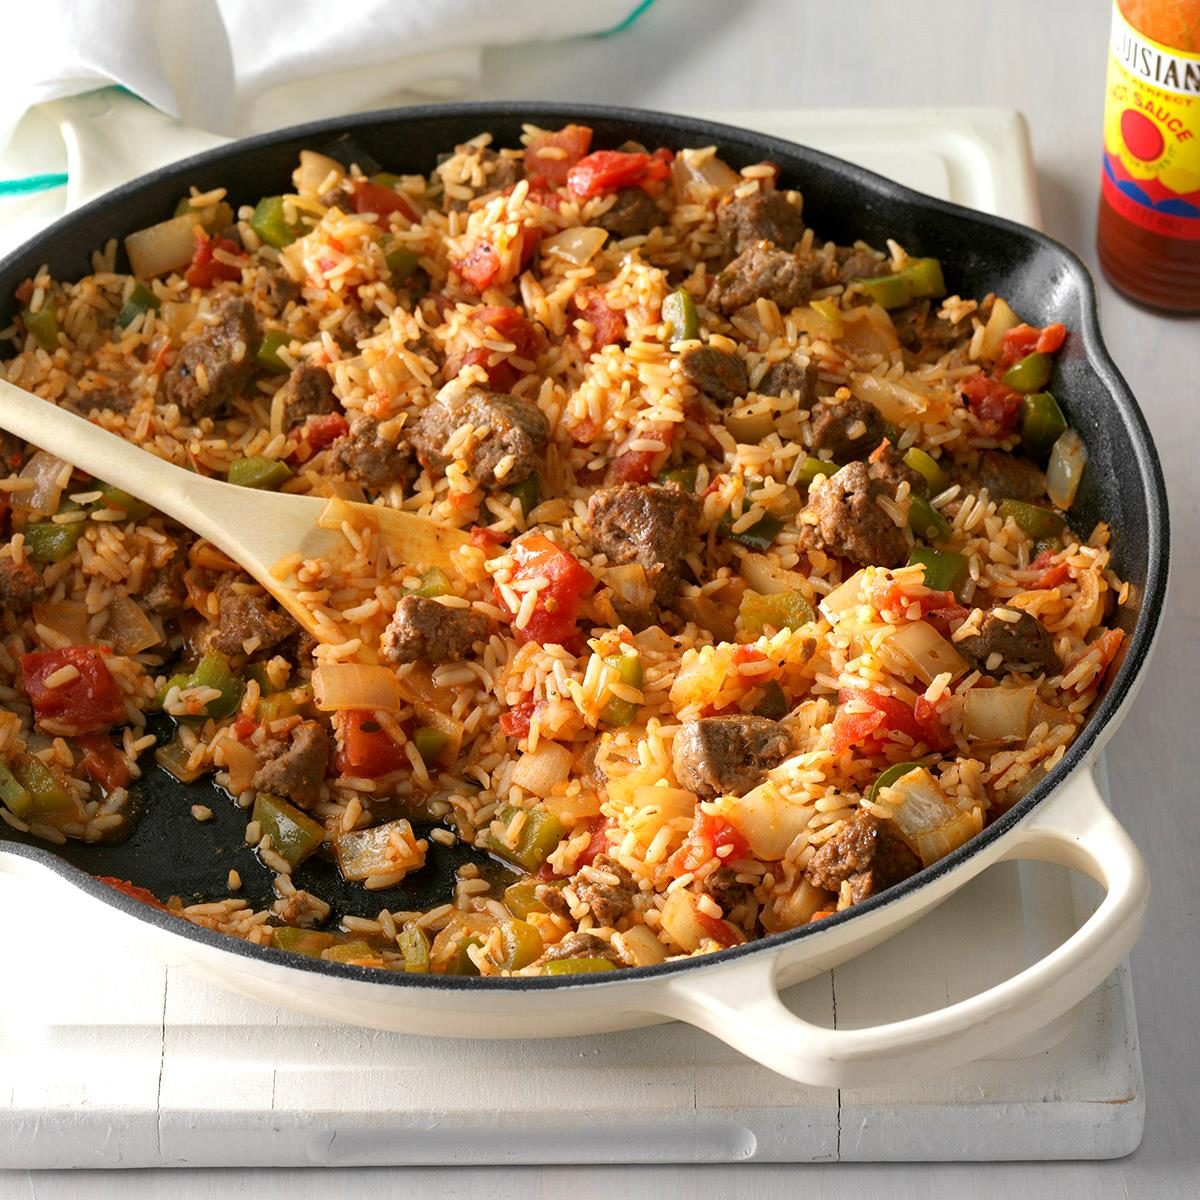 Day 22: Spicy Cajun Sausage and Rice Skillet